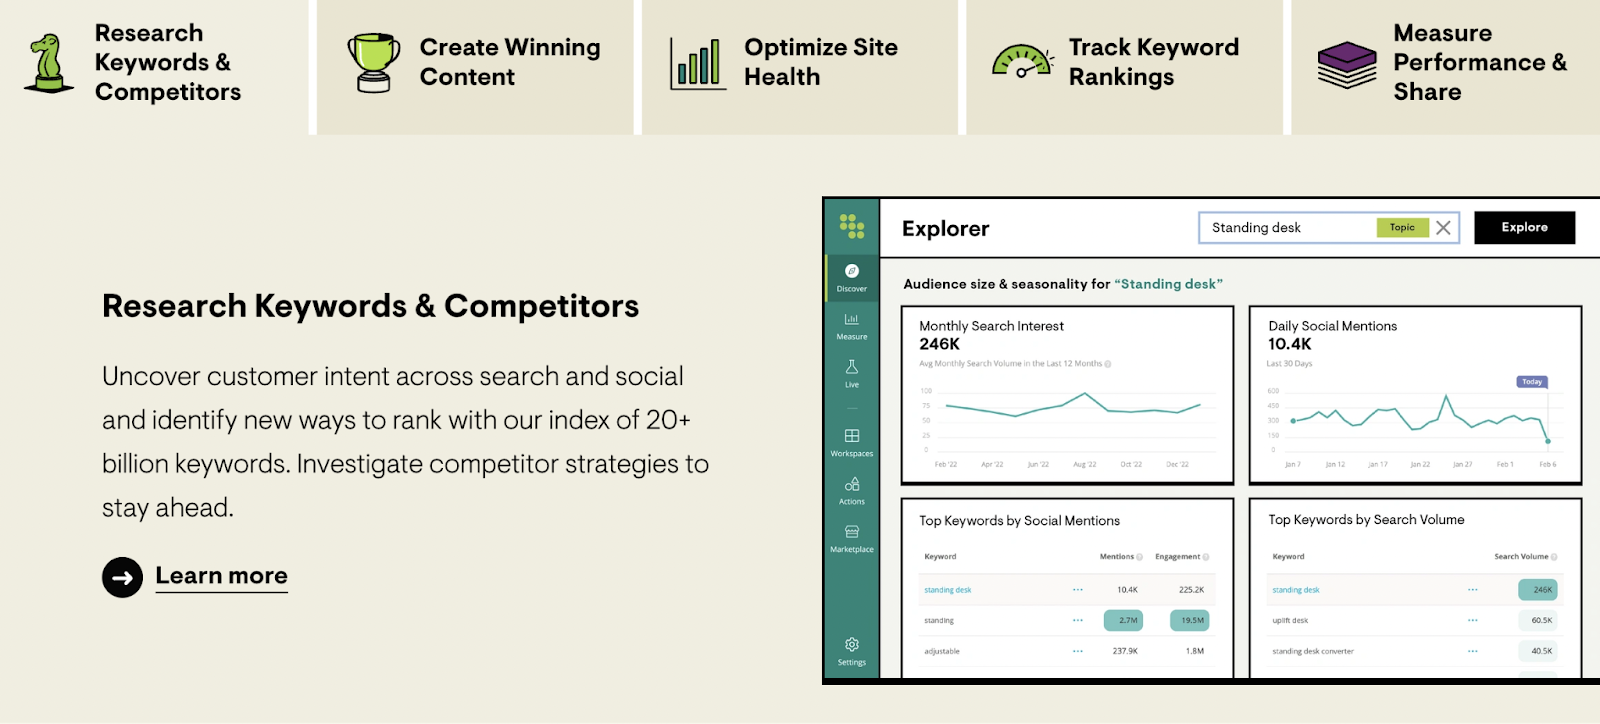 "Research Keywords & Competitors" page of Conductor’s website